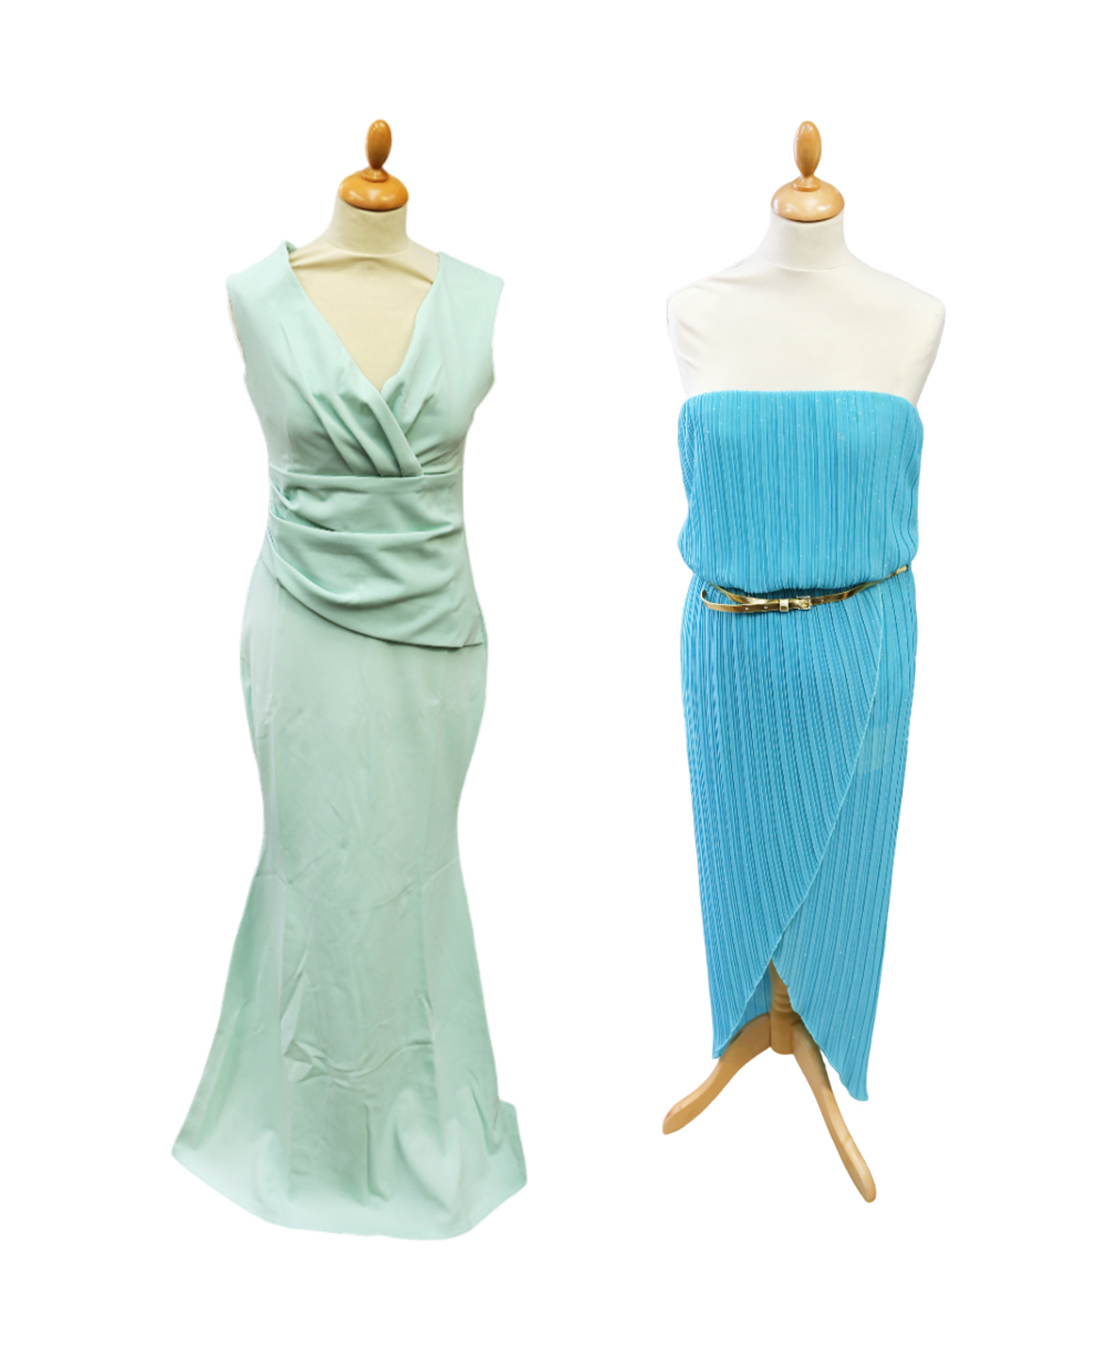 6 Goddiva mint green dresses, brand new with tags, 1 x size 8, 2 x size 10, 2 x size 12 and 1 x size